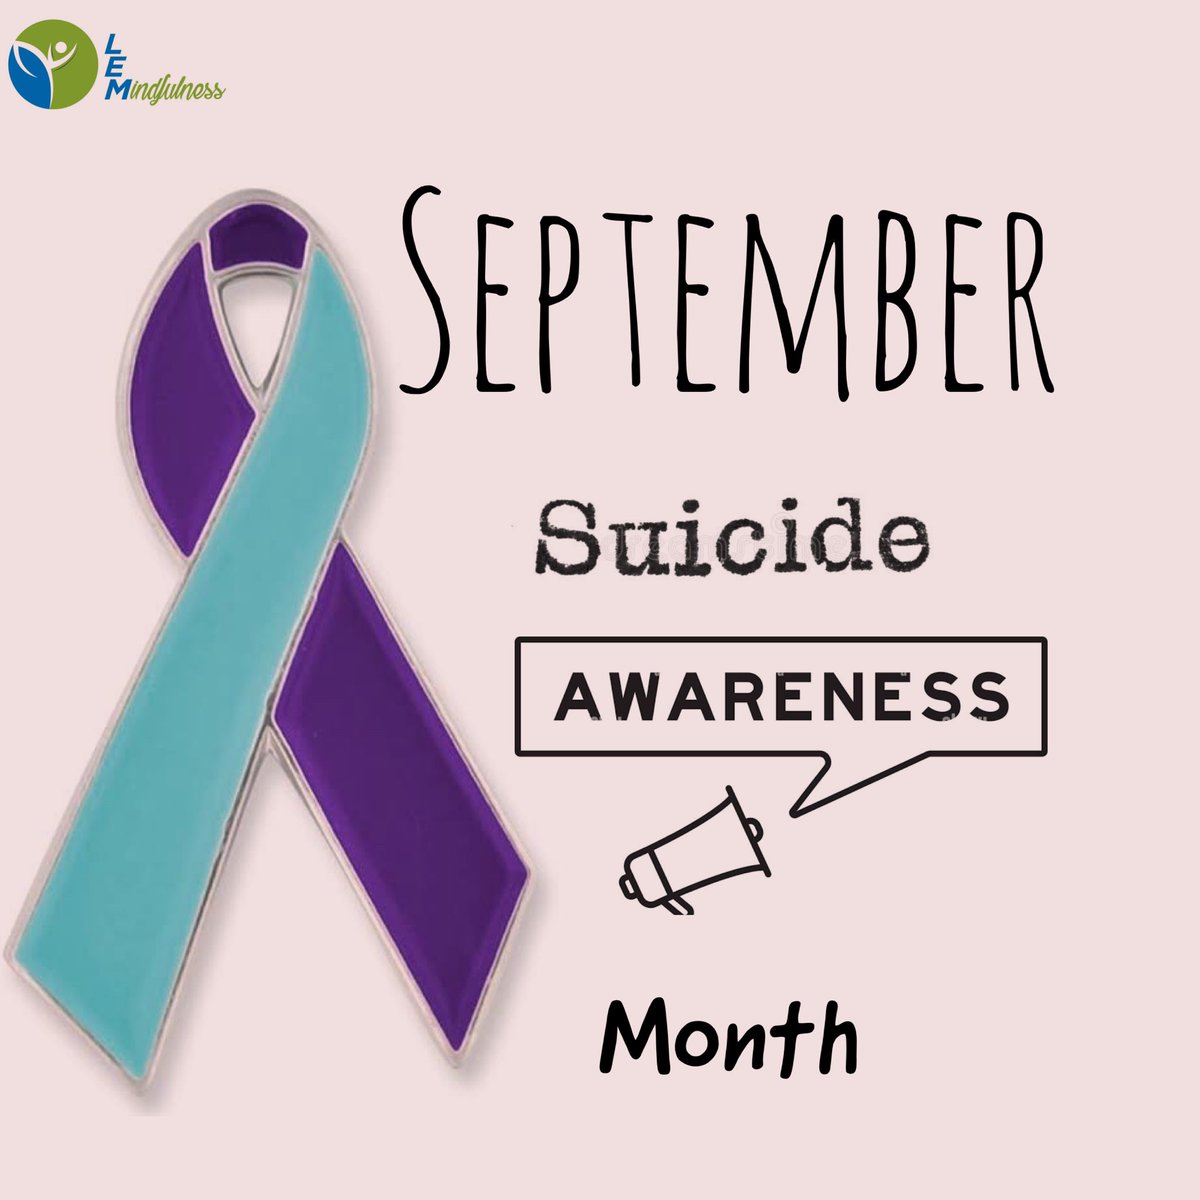 September is  Suicide Awareness Month. This is a time to raise our voices to promote mental health. Let’s stand together, spread hope and help those in need through raising awareness

#SuicideAwarenessMonth #MentalHealthMatters